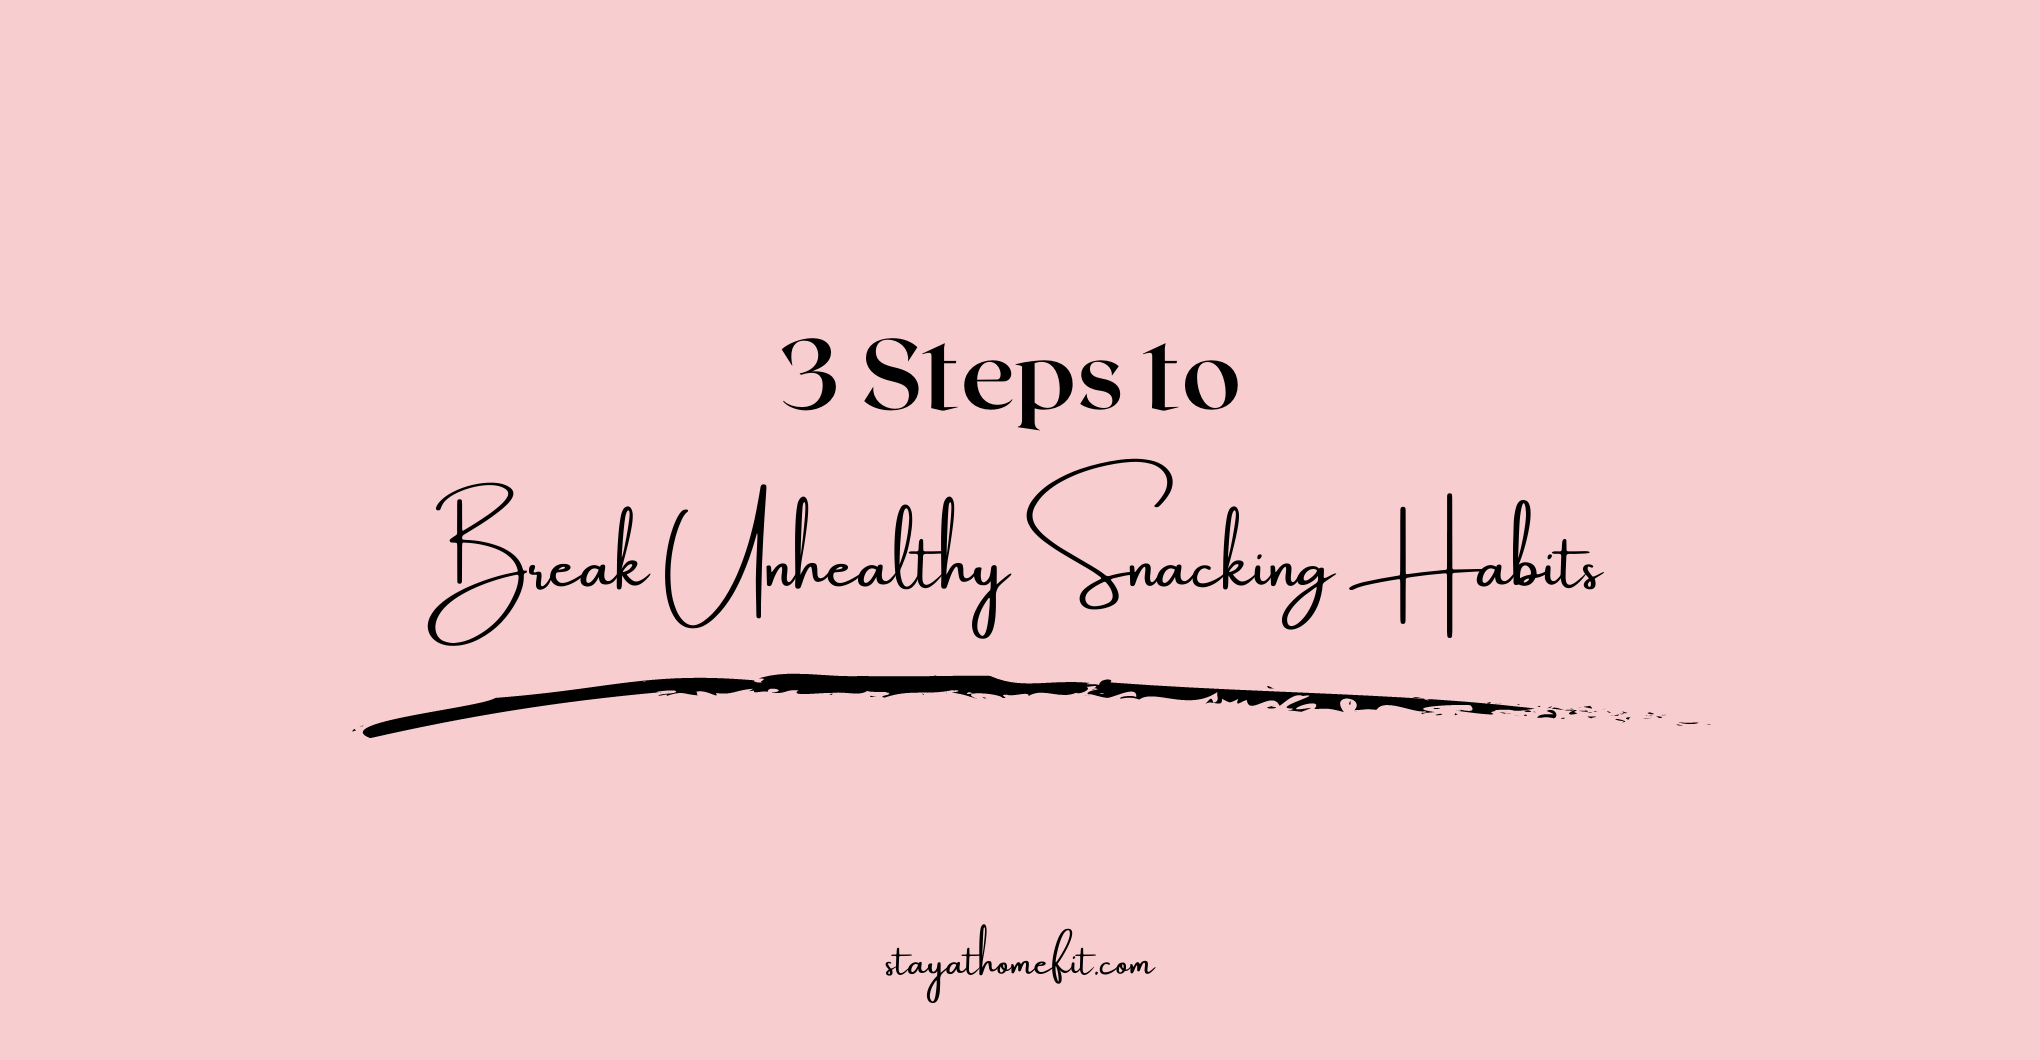 Blog Title: 3 Steps to Breaking Unhealthy Snacking Habits